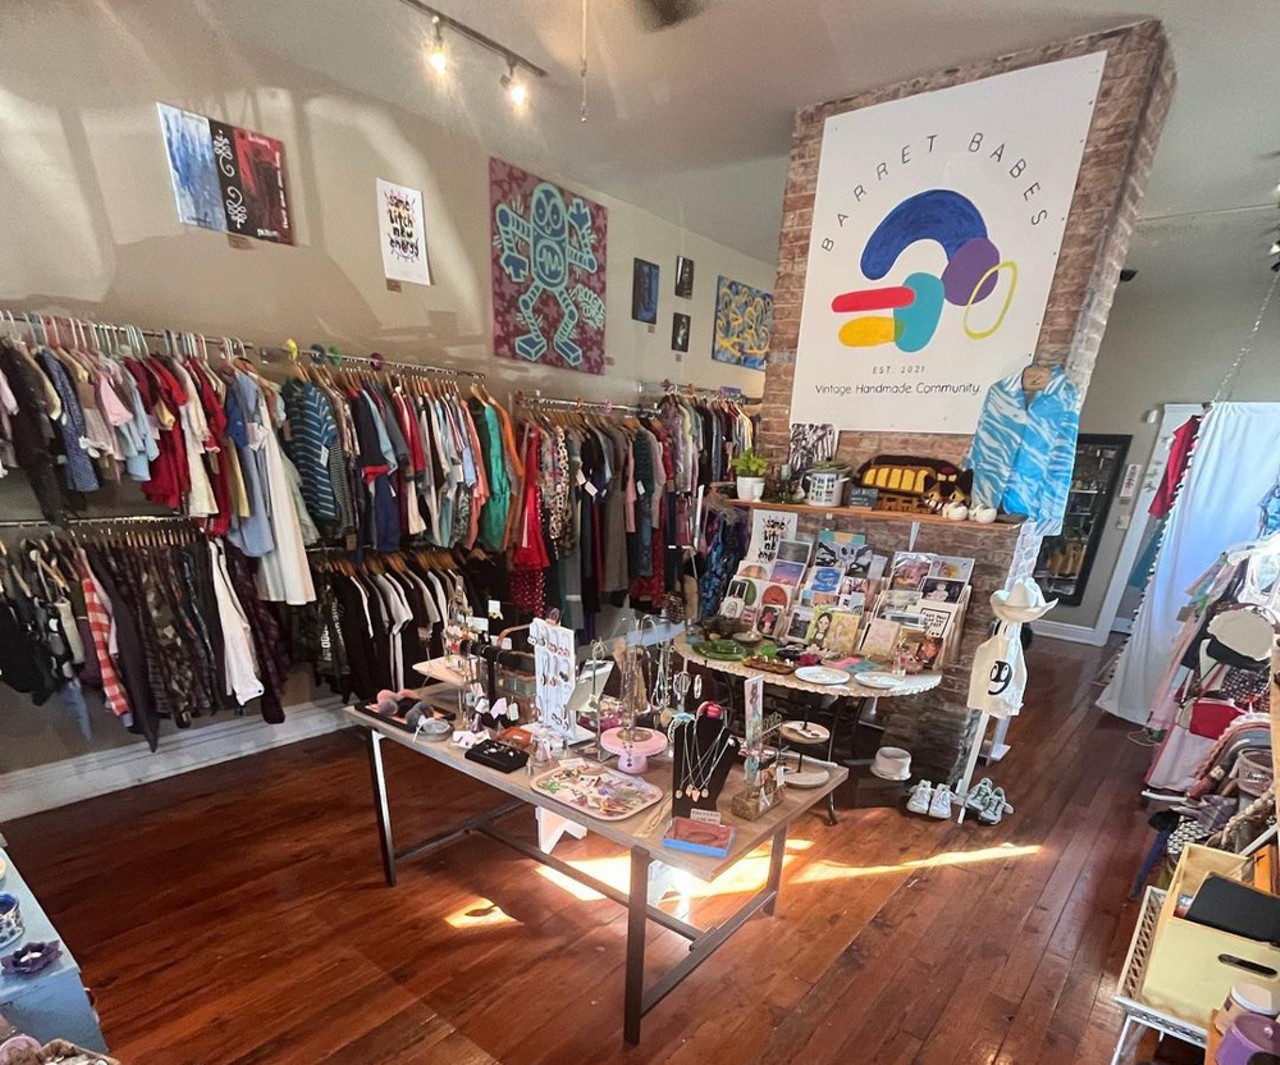  Barret Babes 
970 Barret Avenue
This cute size-inclusive vintage clothing store also sells plants and artwork by 40+ local creators. 
Photo via thebarretbabes/Instagram